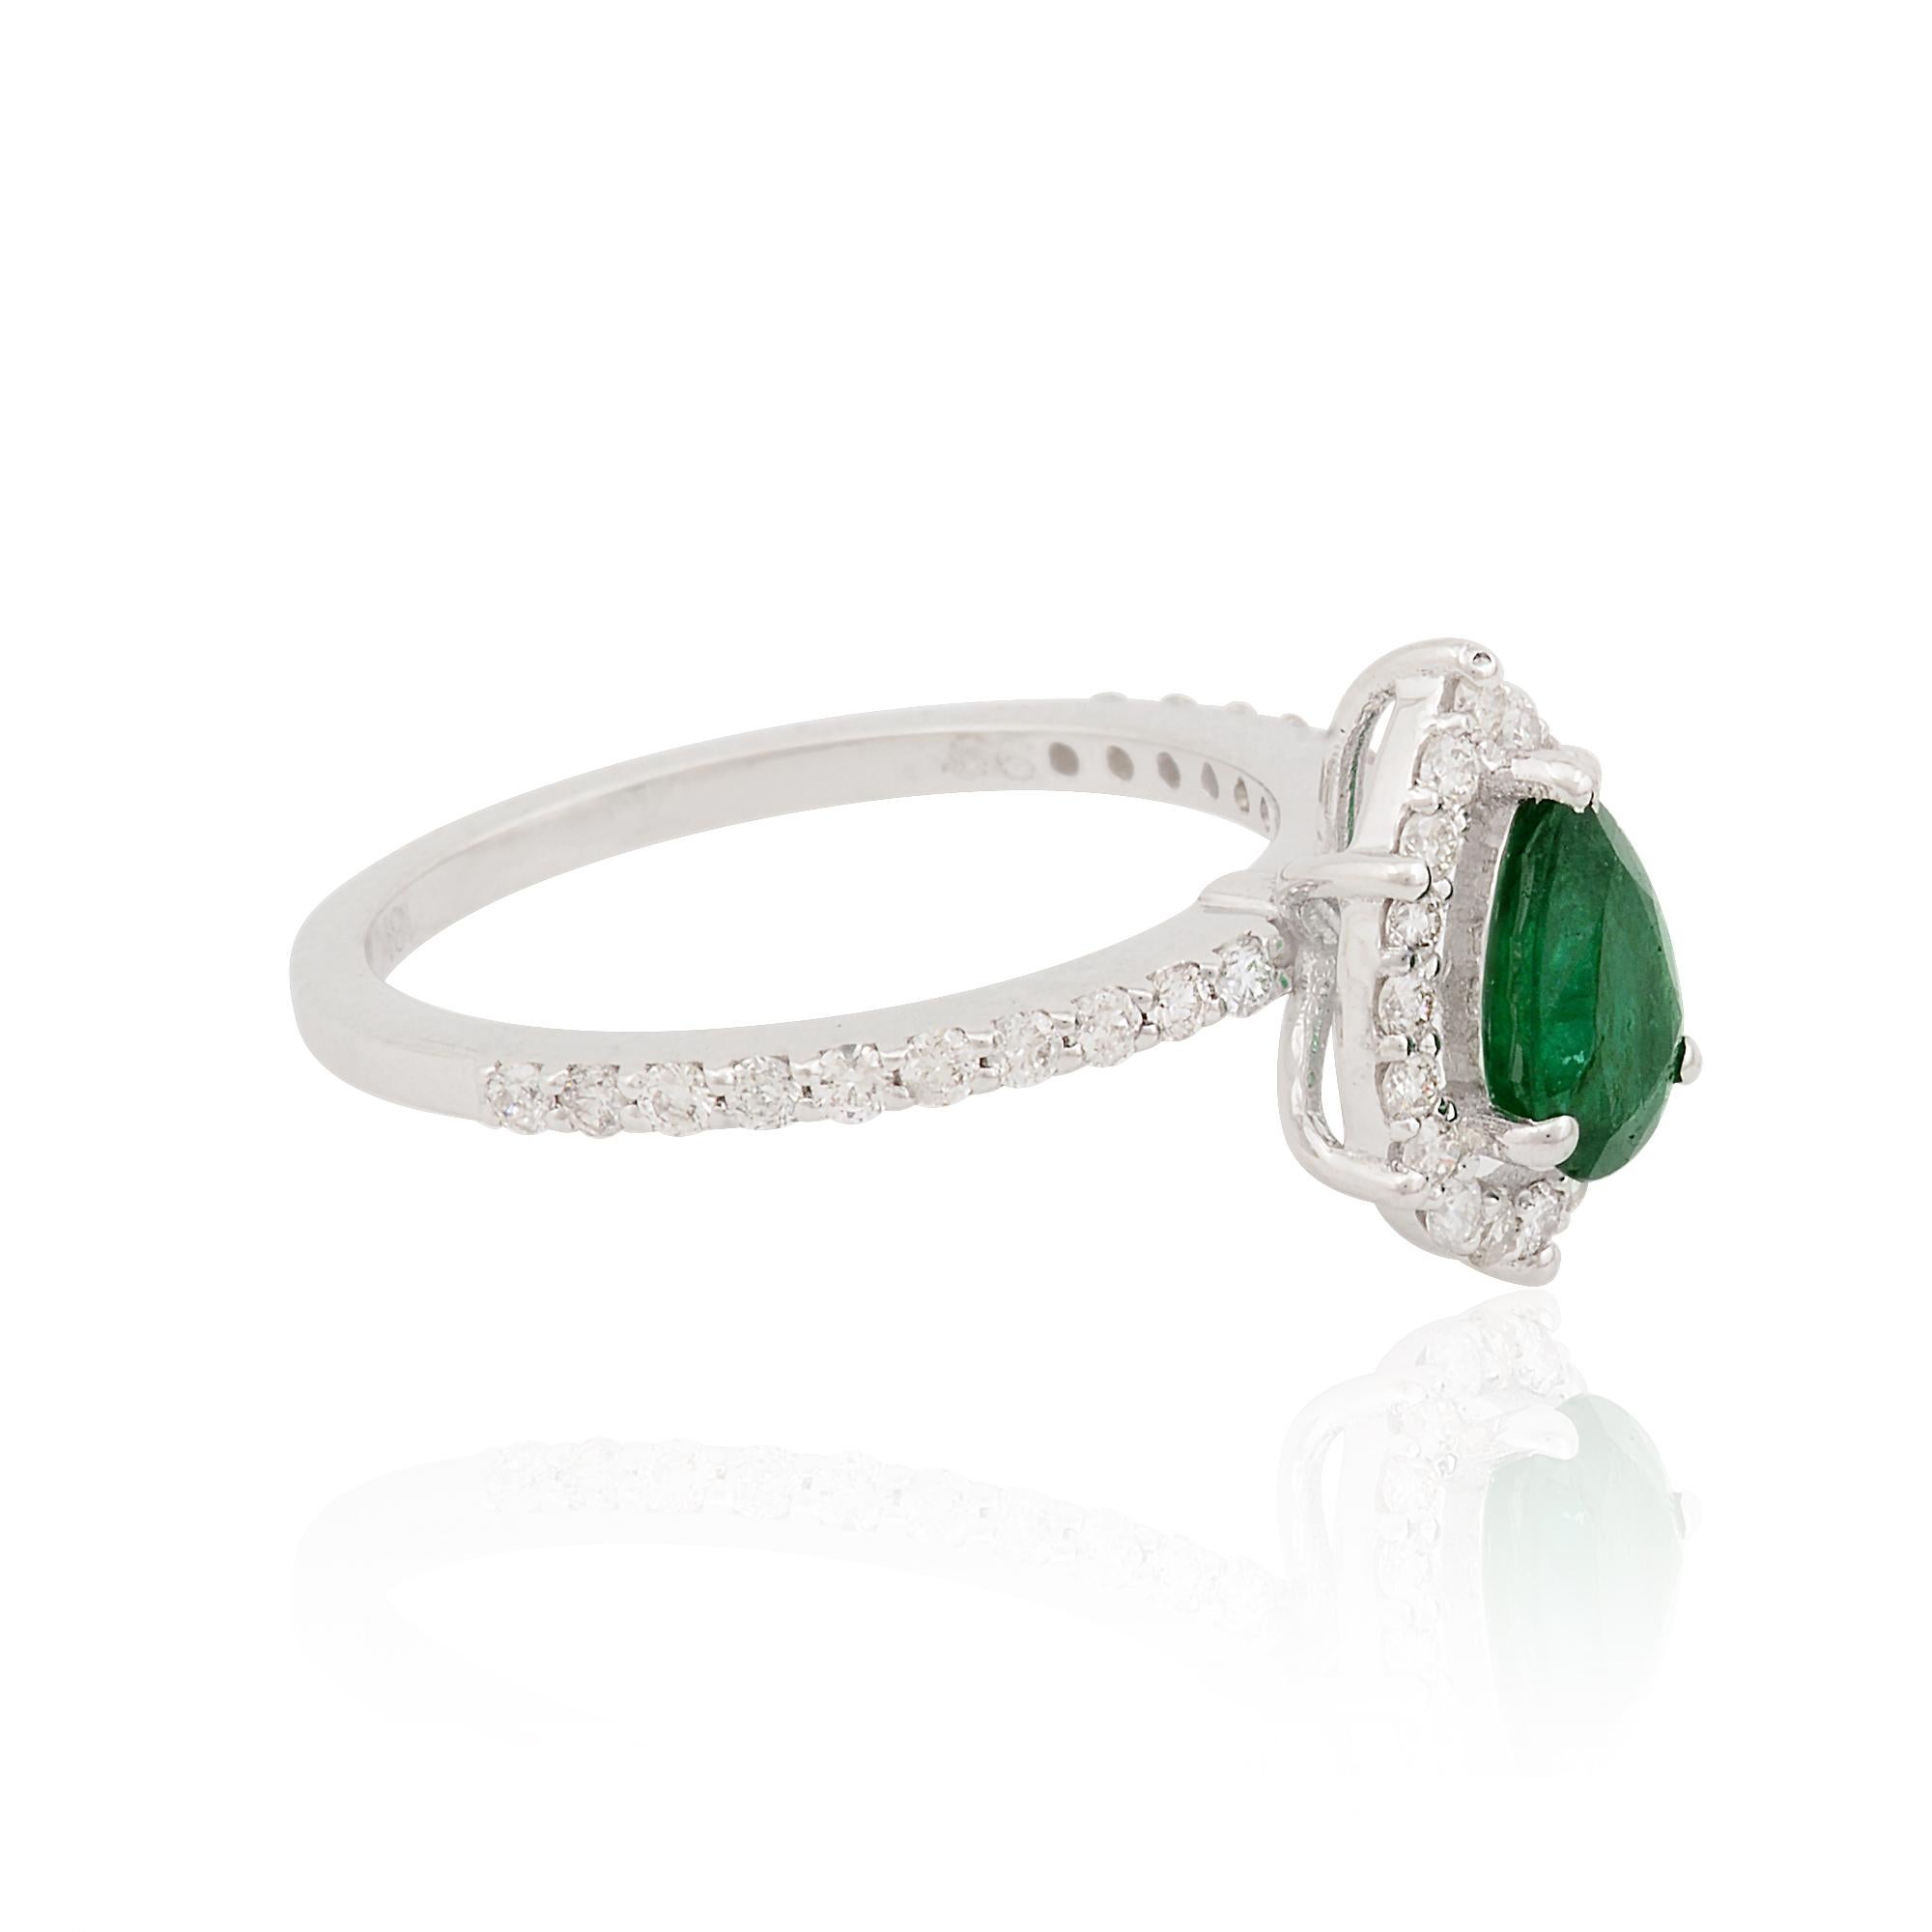 For Sale:  Pear Emerald Gemstone Ring Diamond Pave Solid 18k White Gold Handmade Jewelry 2